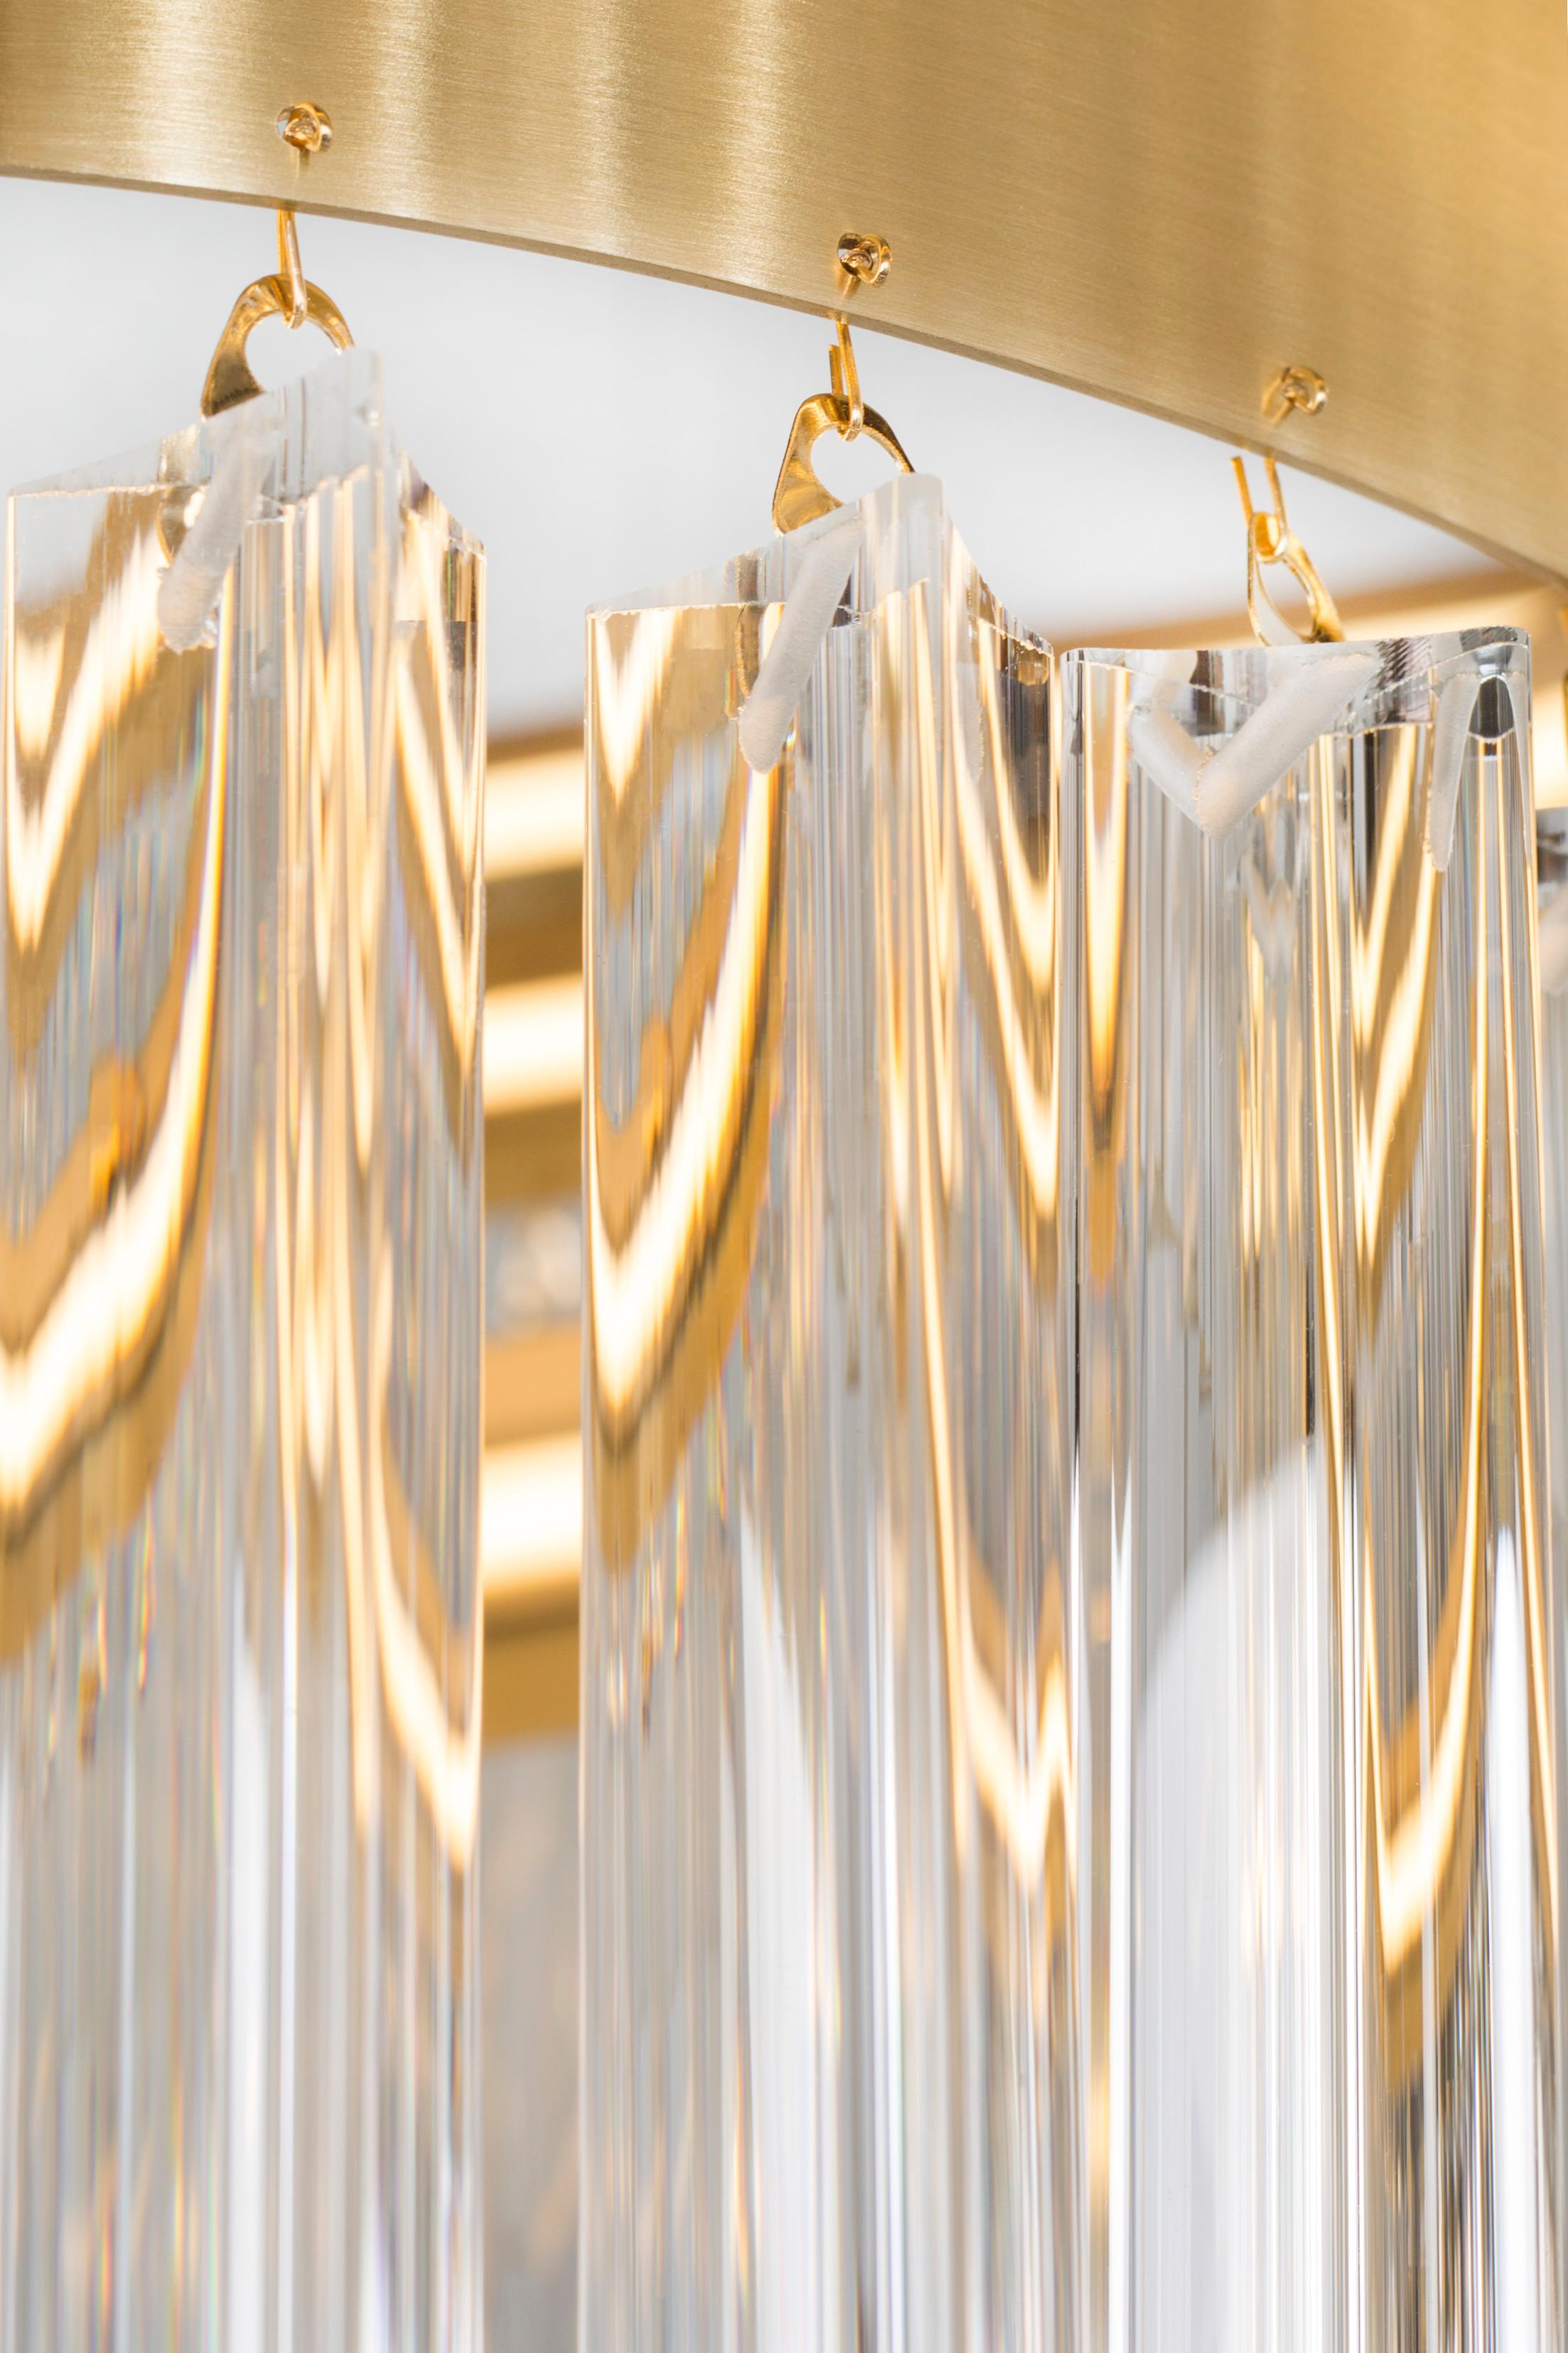 Erebus chandelier, Modern Collection, Handcrafted in Portugal - Europe by GF Modern.

The combination of brushed brass details with handcrafted crystal pendants creates a stylish, lustrous vibration. A new interpretation of chandelier design with